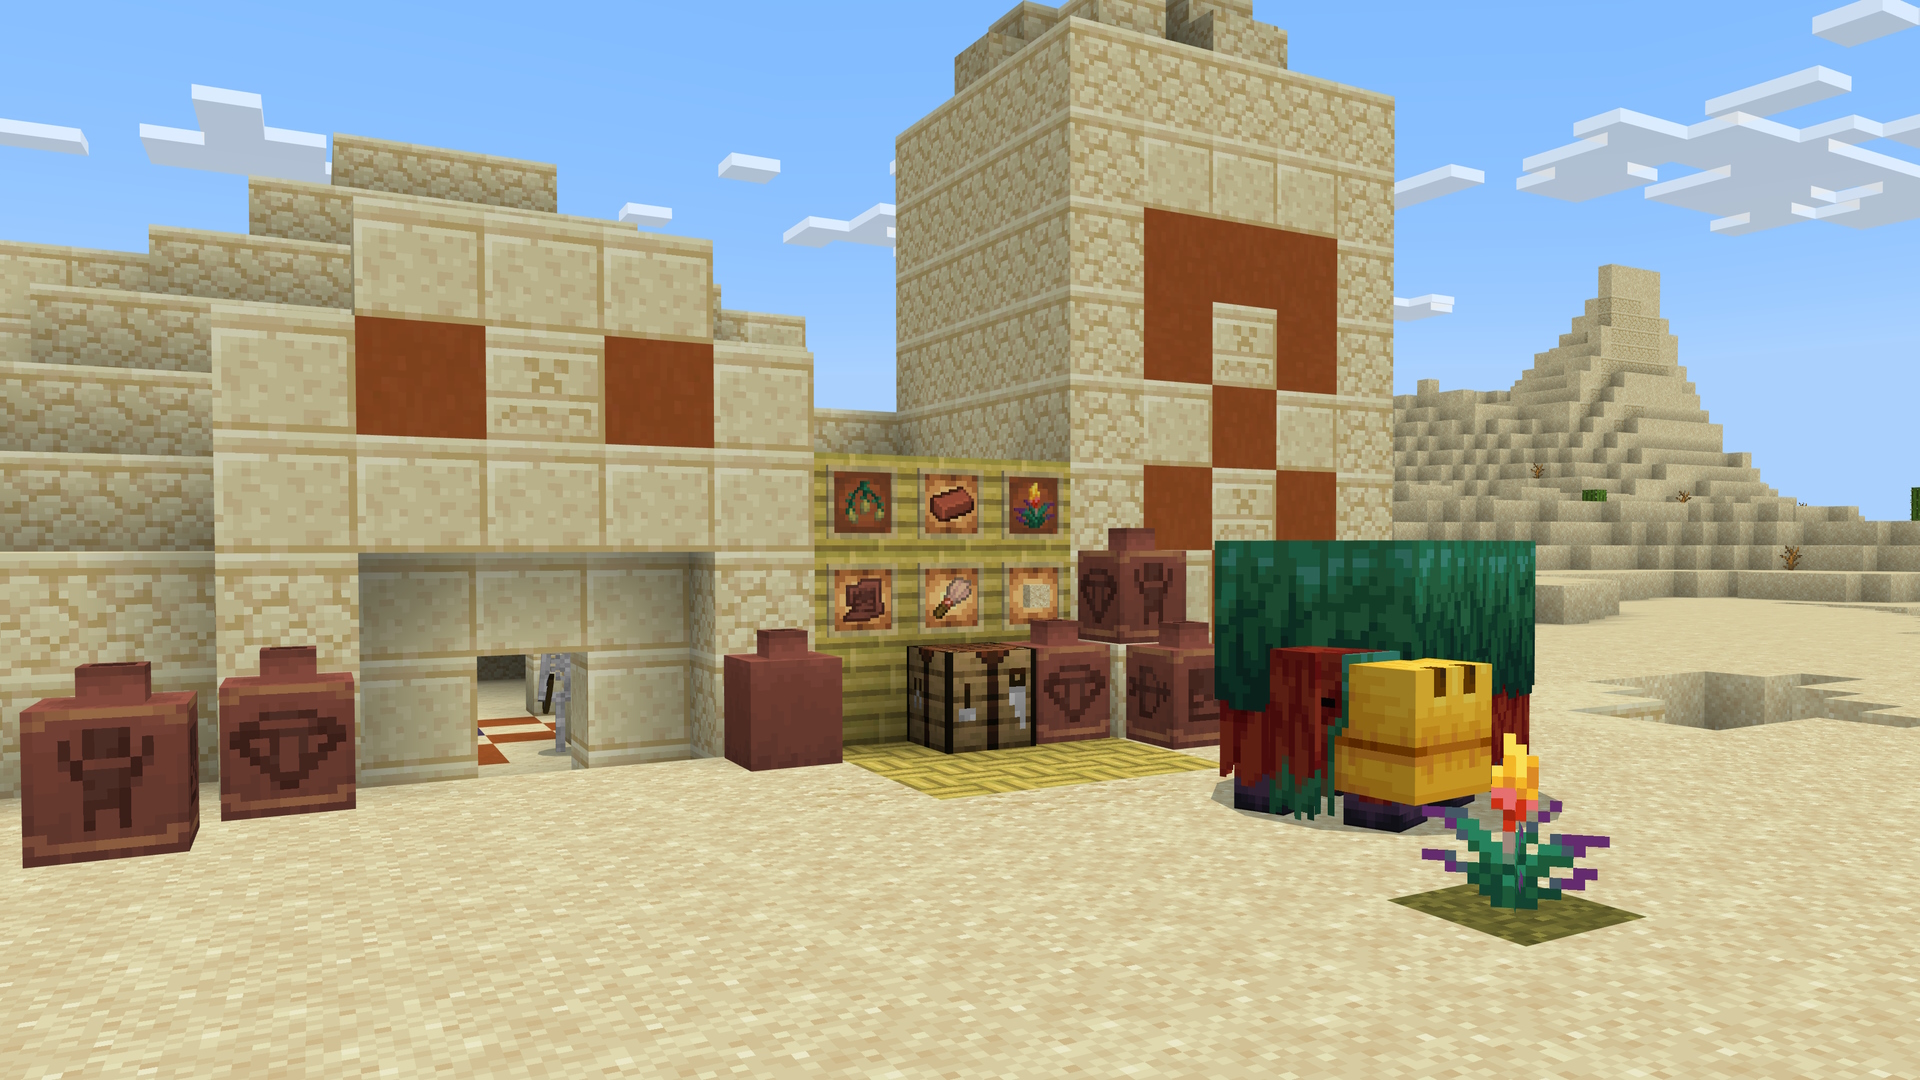 A Minecraft screenshot featuring the sniffer mob and flower, and items related to archaeology including decorated pots, set in front of a desert temple.